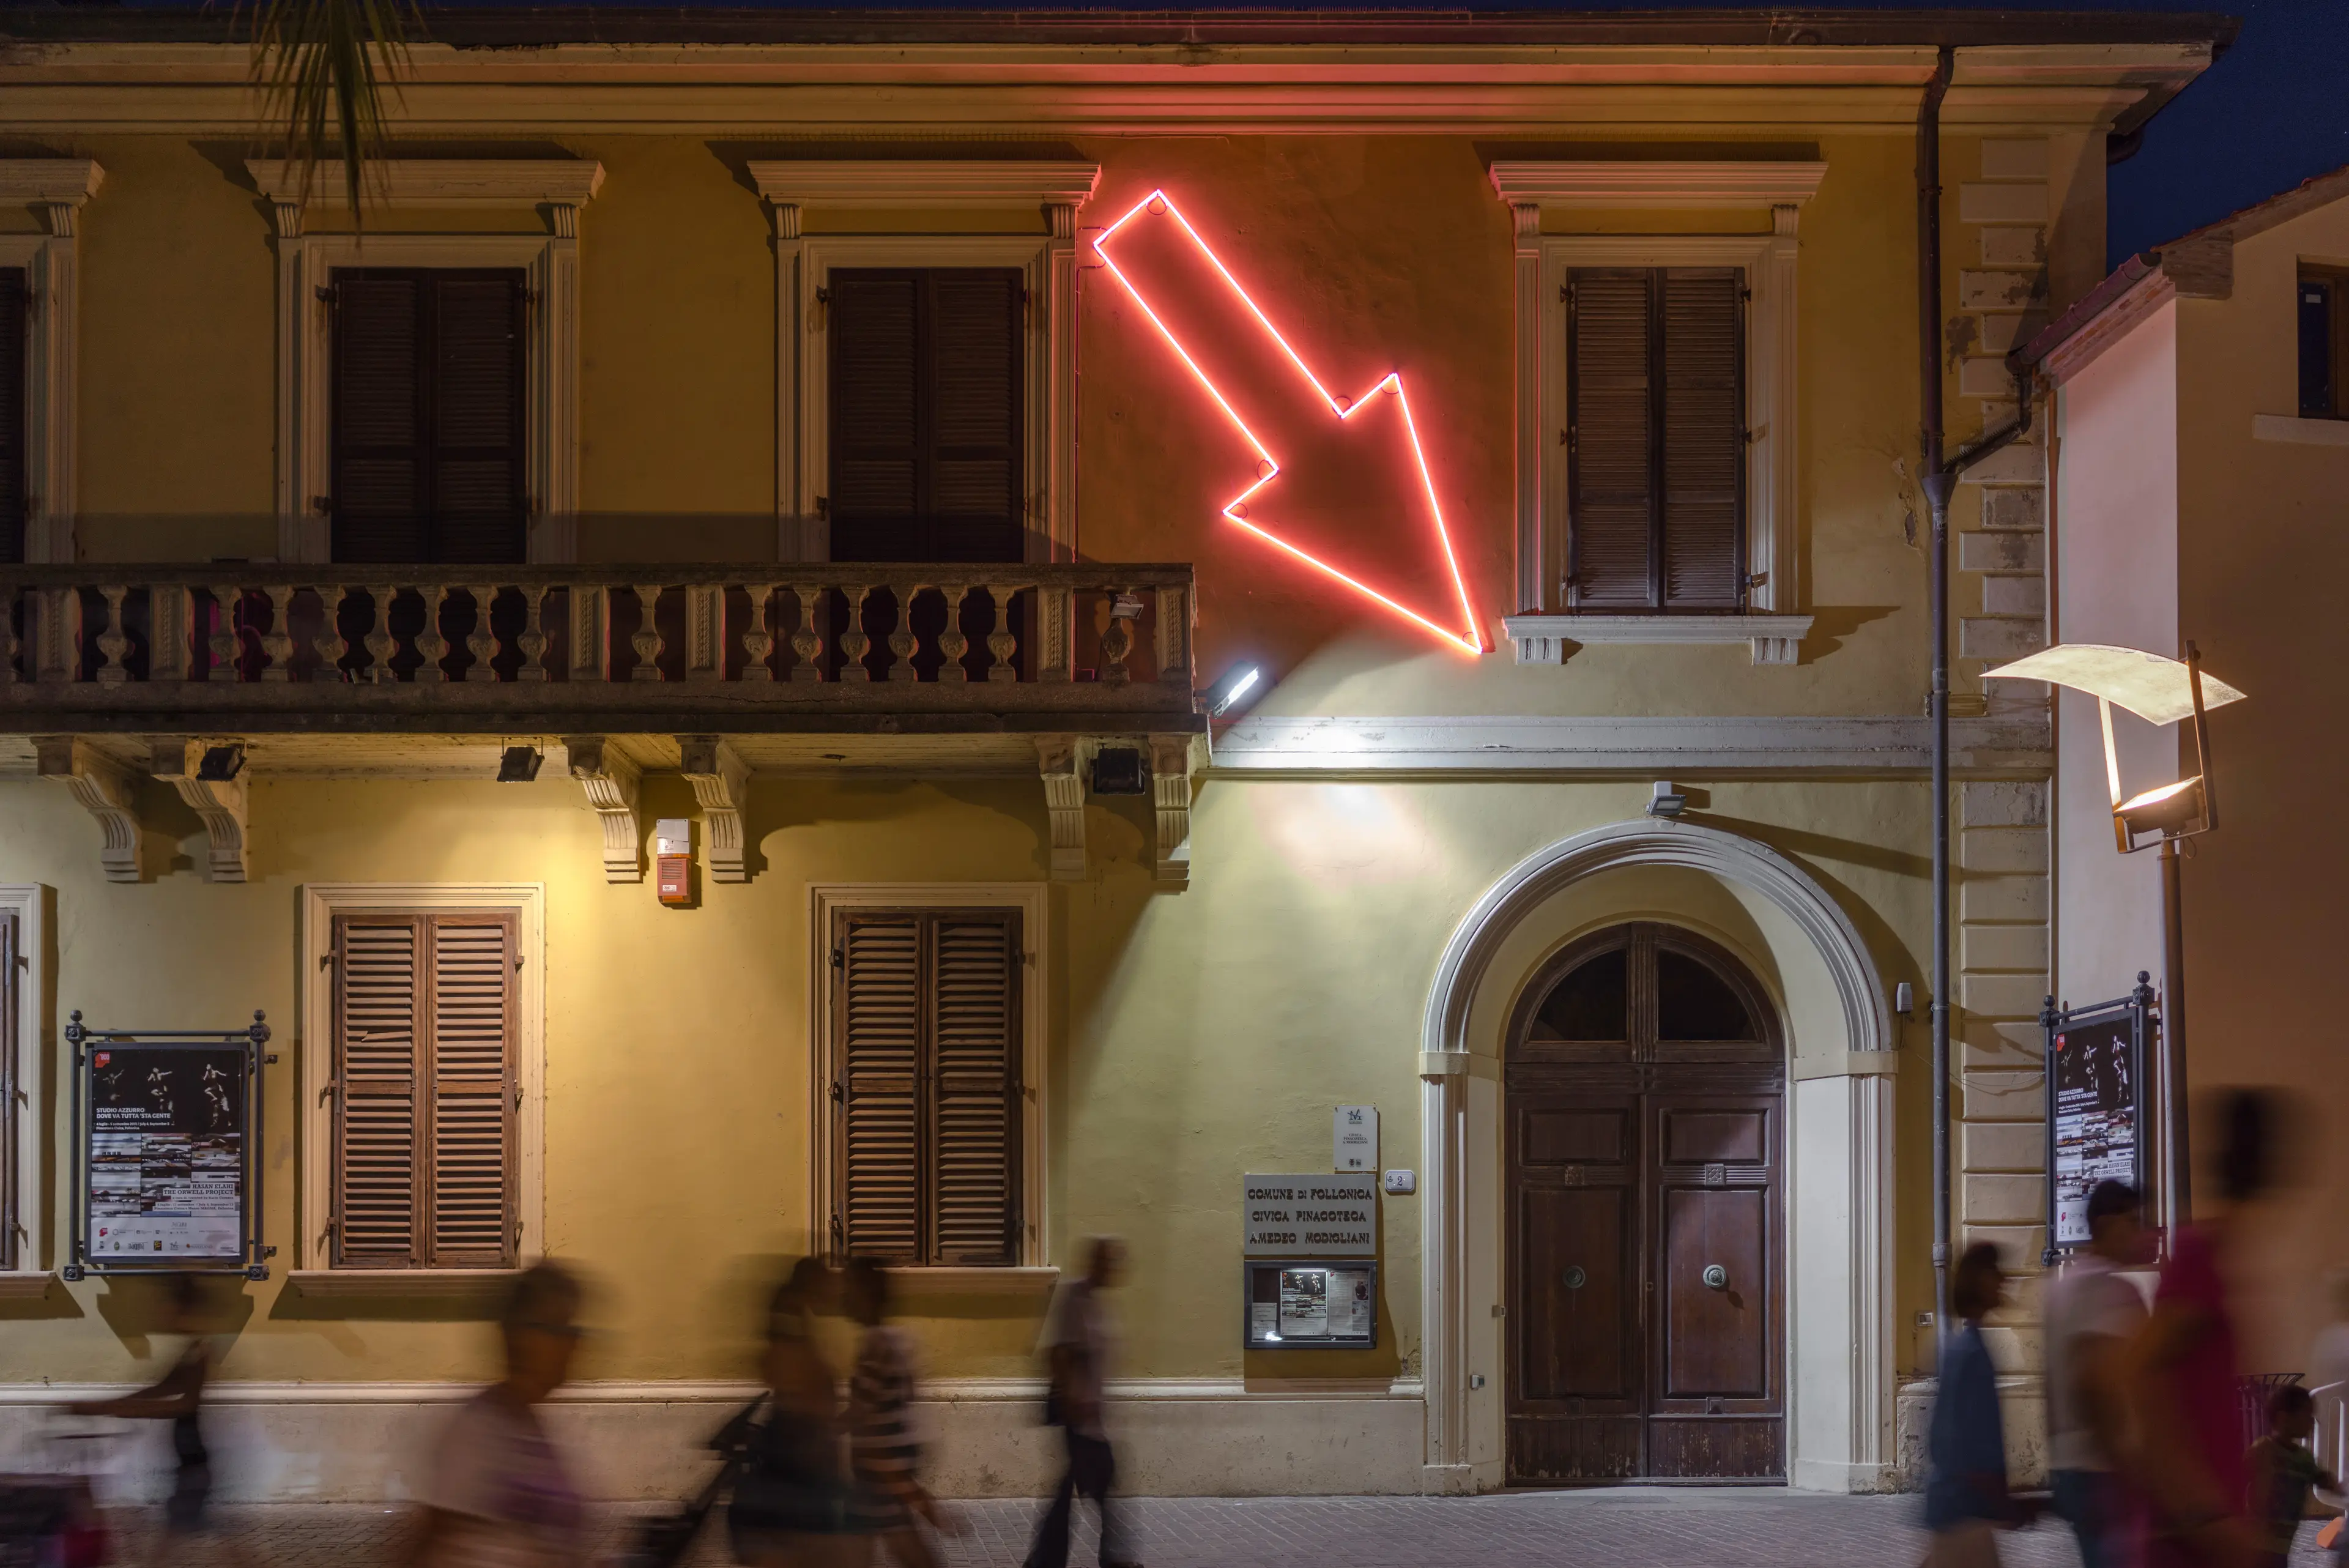 Picture of large red neon arrow pointing down to the right towards a door.